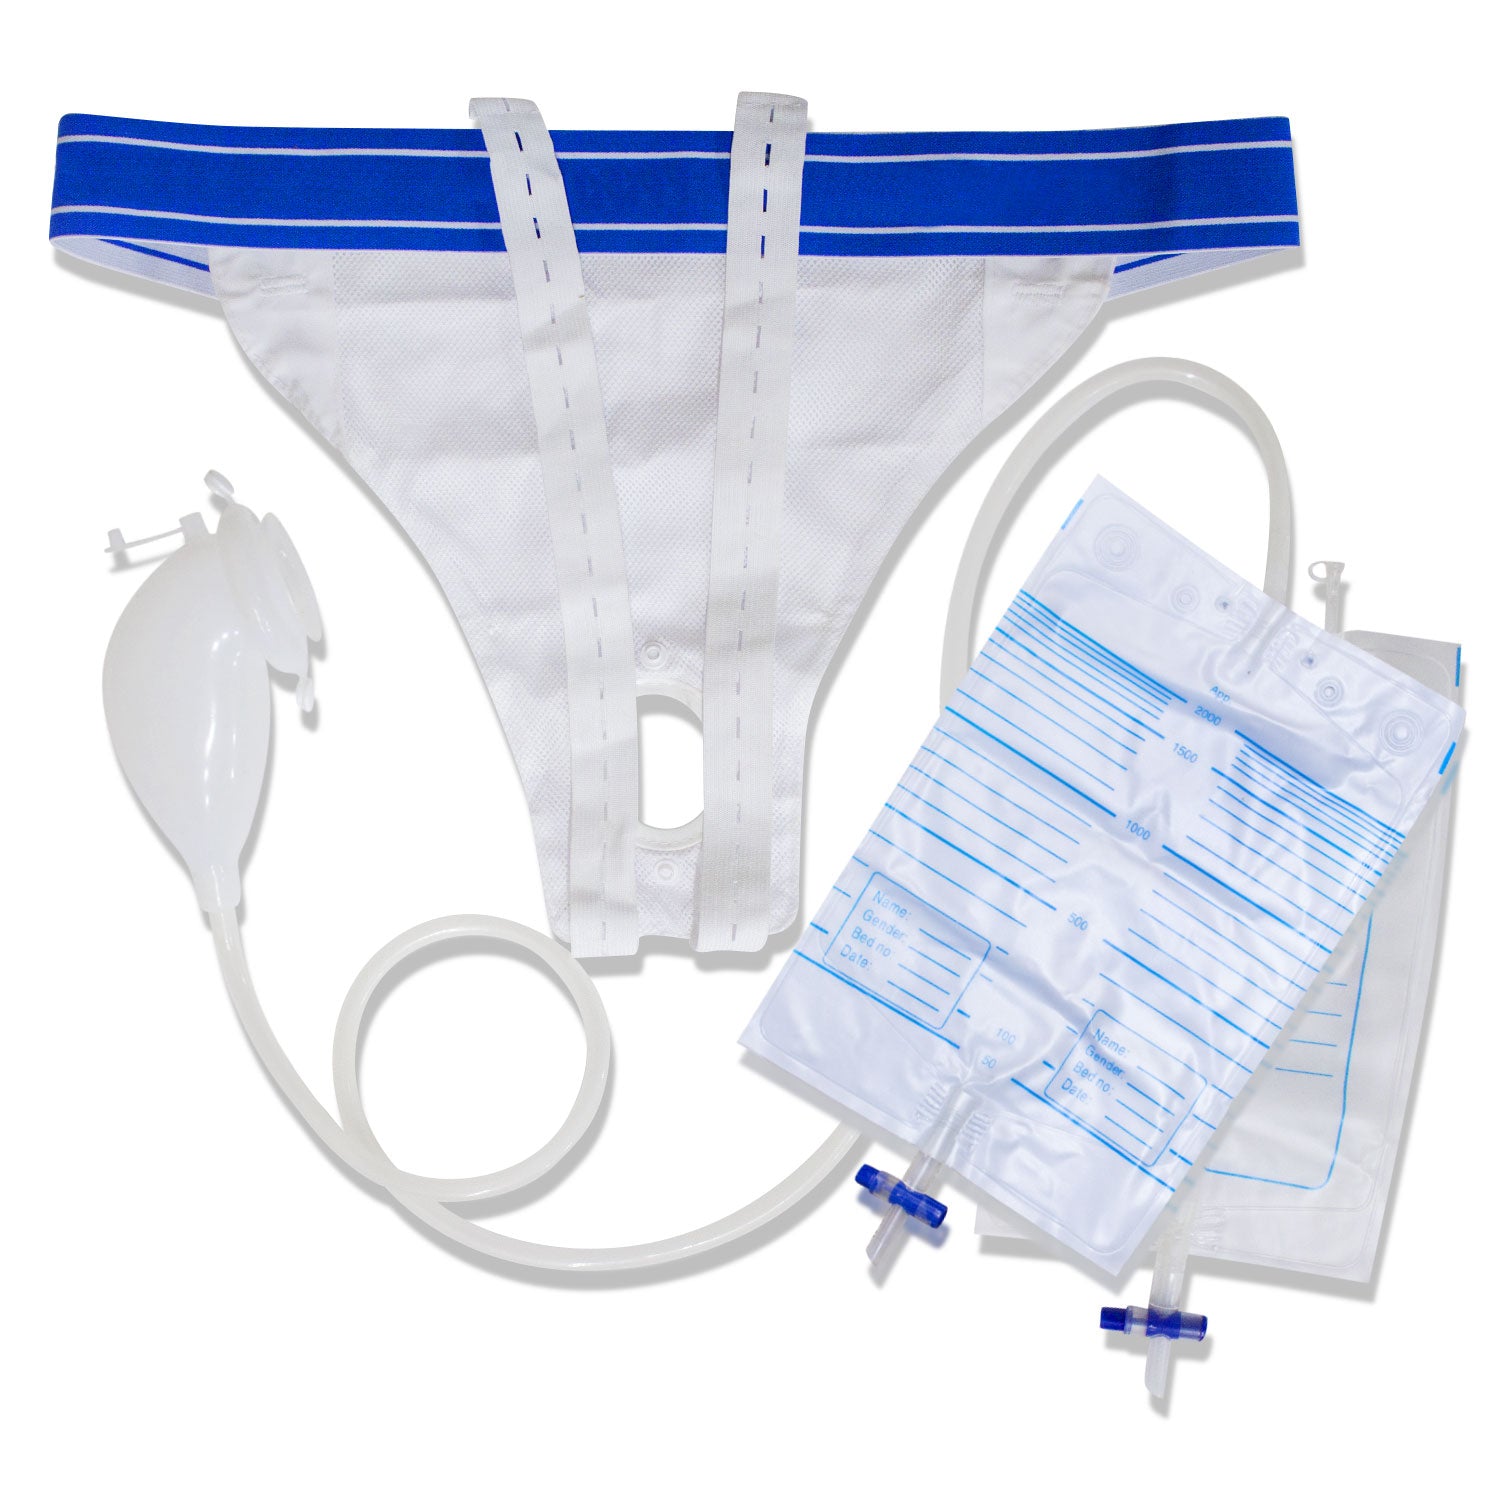 Urine Collection Bag for Male Incontinence - Community Medical Products